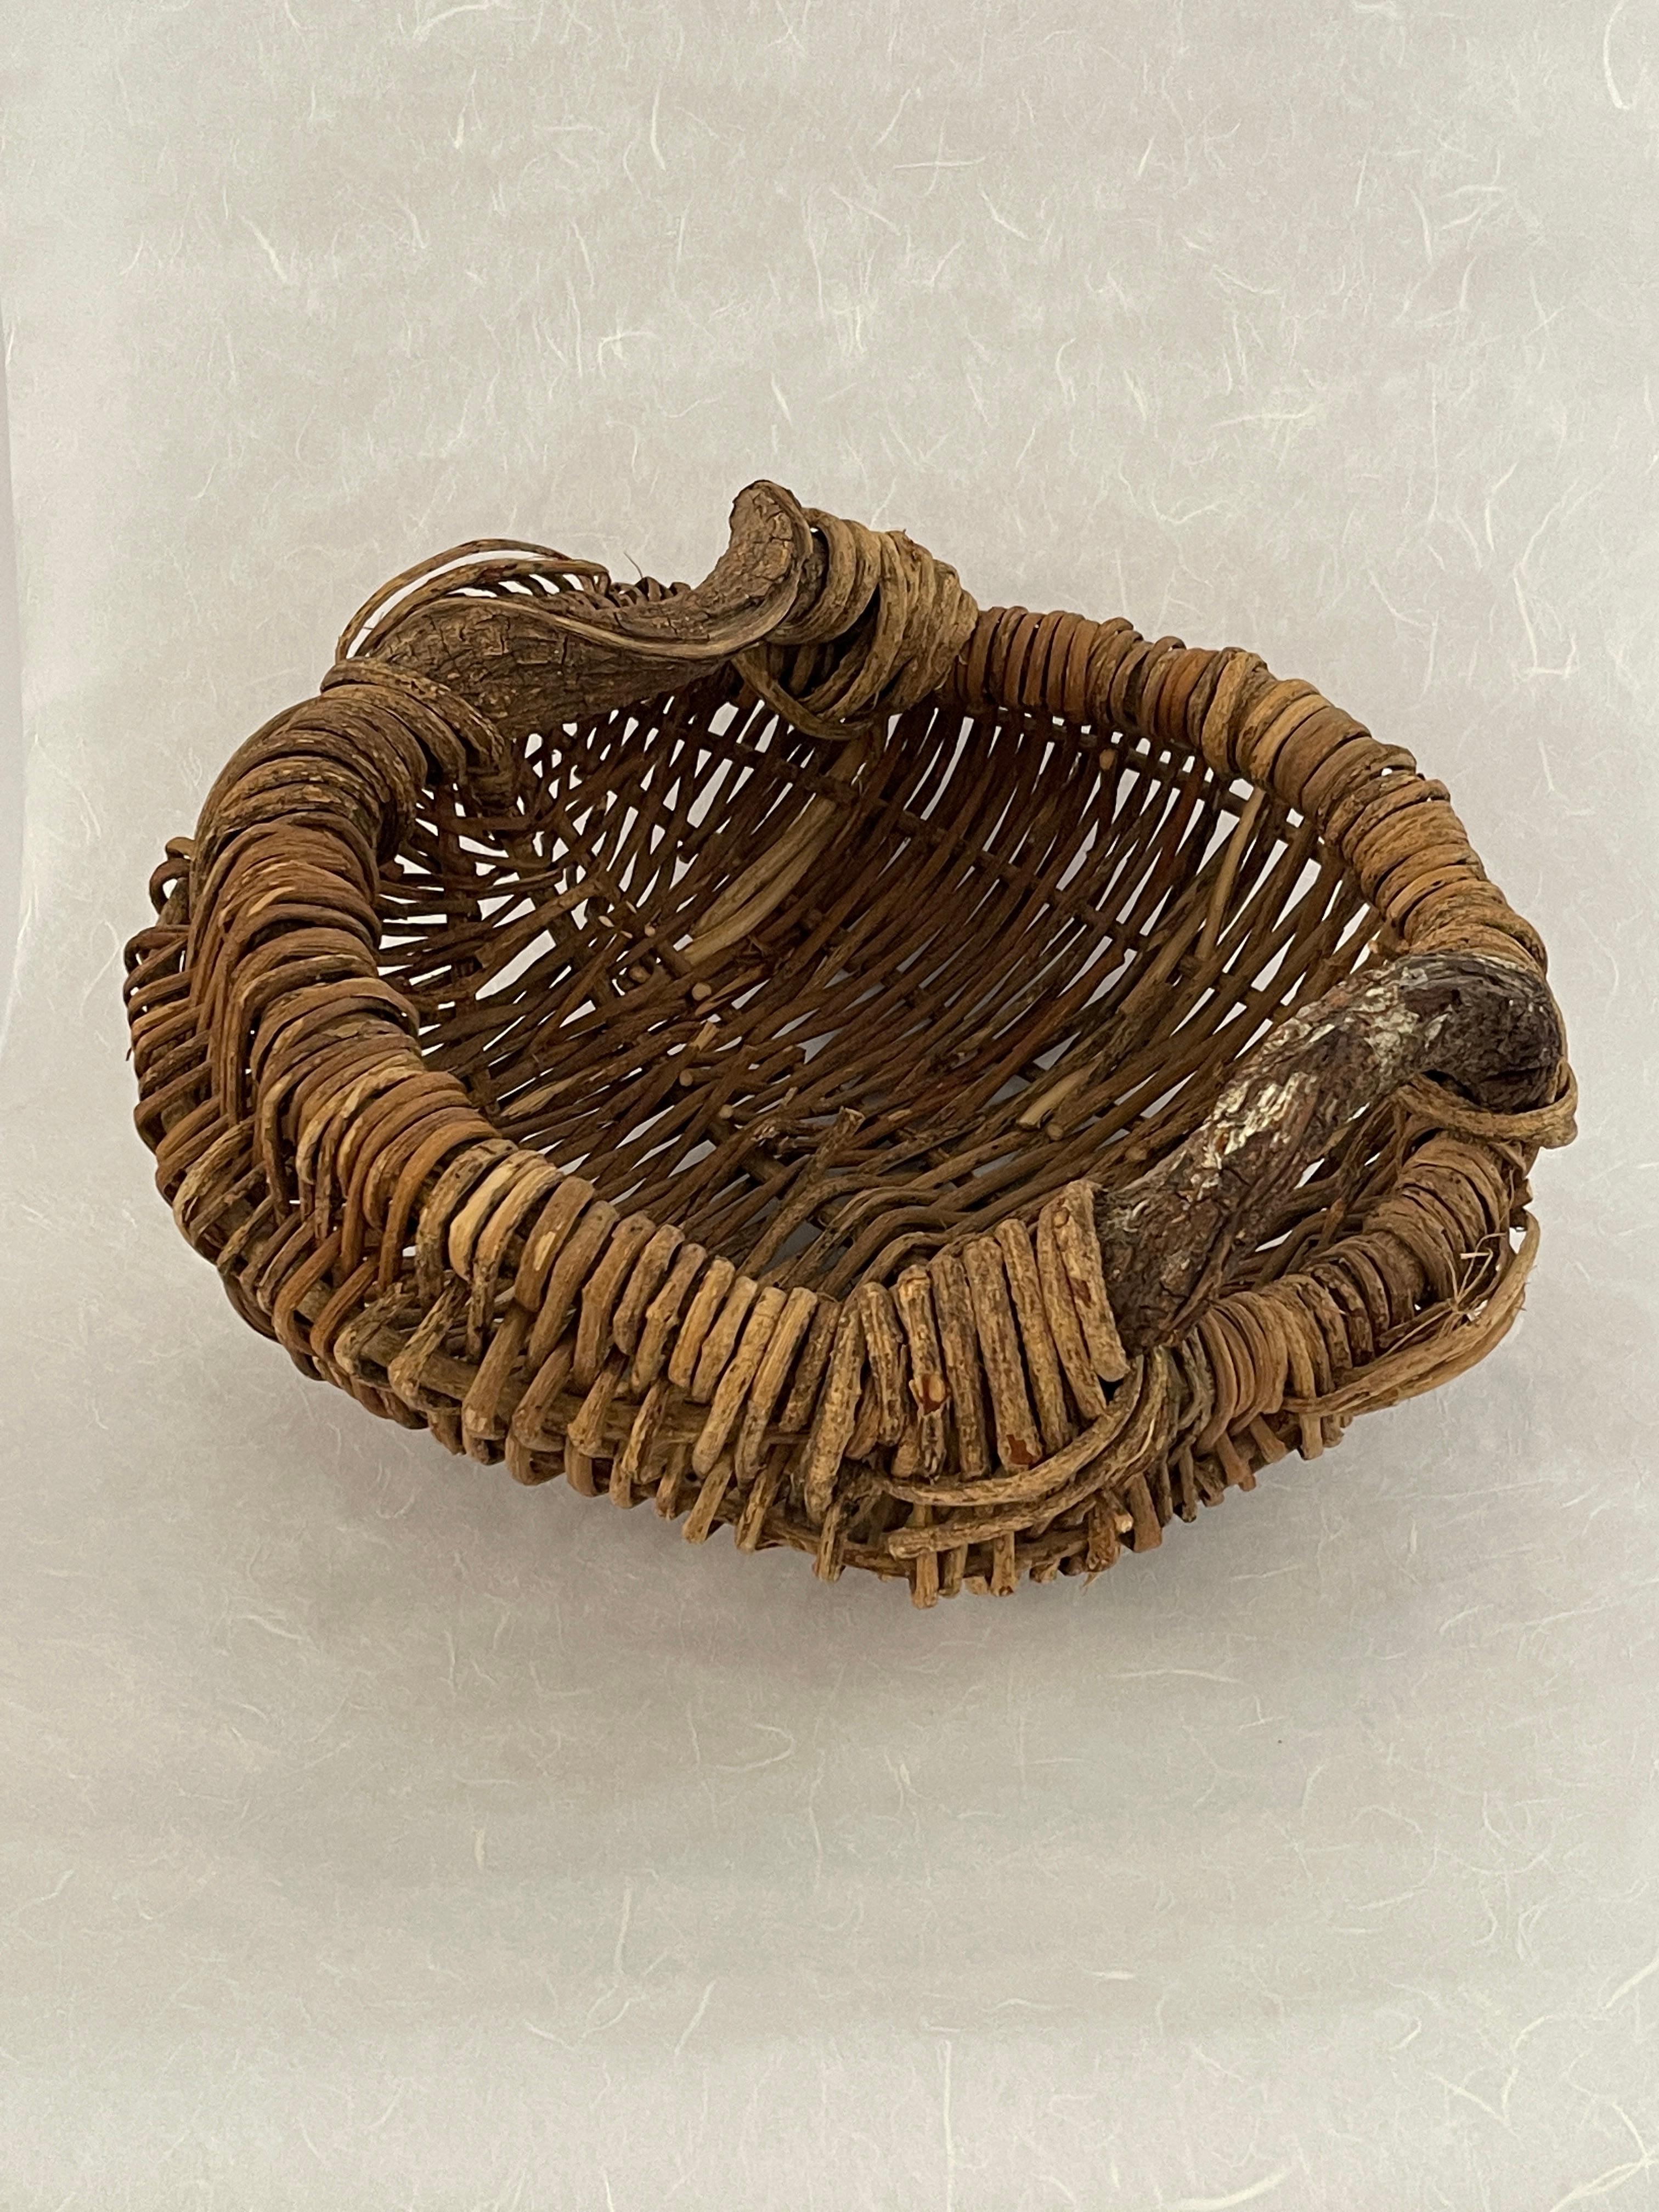 20th Century Organic Handled Woven Basket with free form curved branch handles and a wicker weaved body. Perfect basket for all year round or seasonal. Great piece for collecting items or display empty on any table, shelf, or floor. 